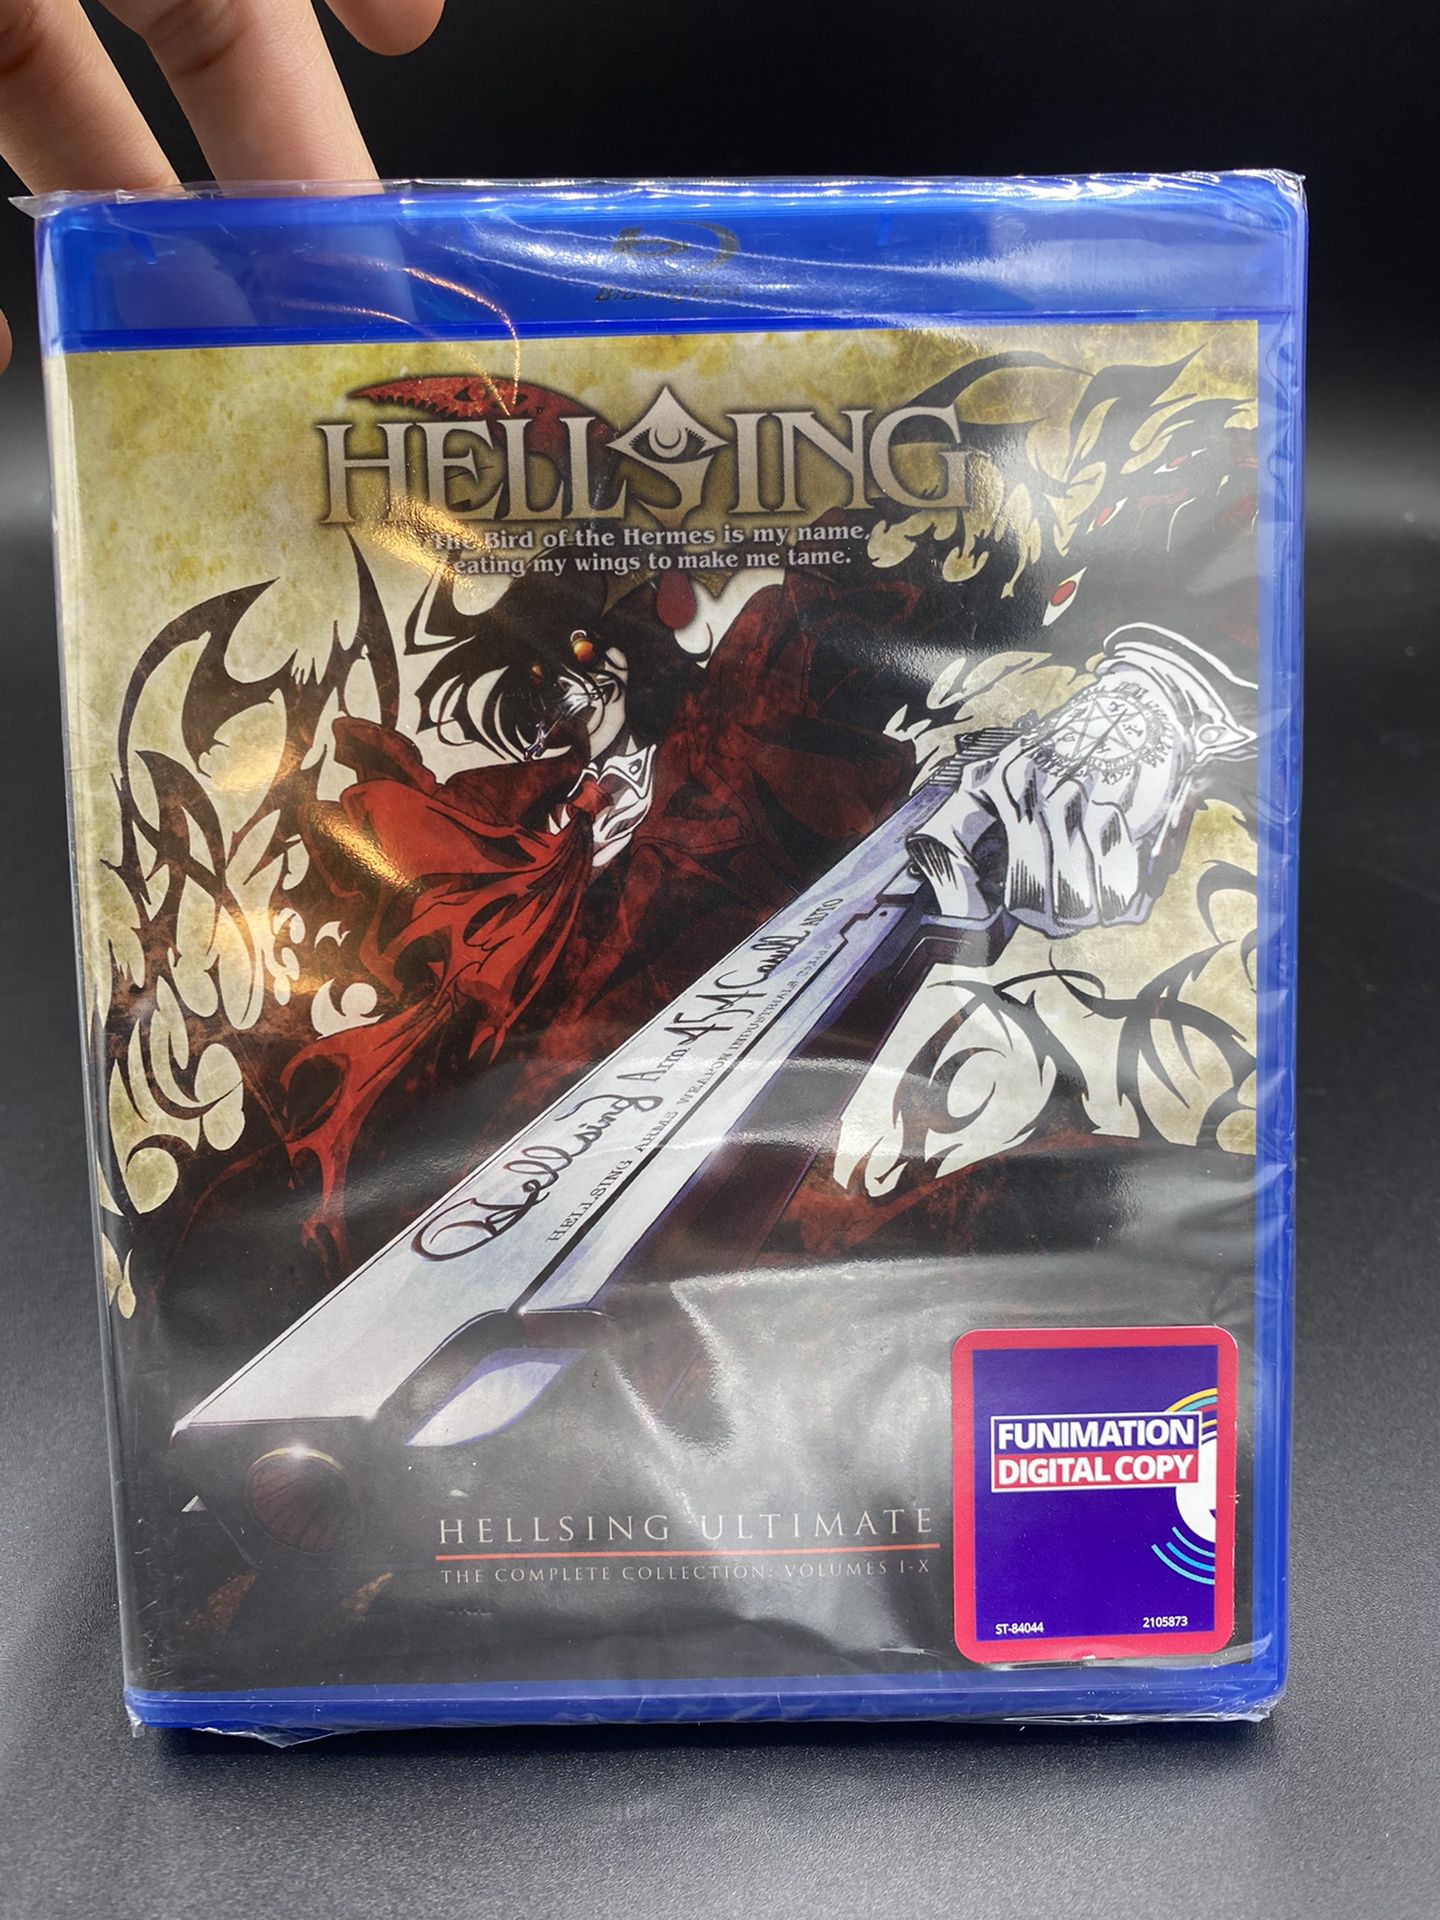 Hellsing Ultimate The Complete Collection Volumes 1-10 I-X (Blu Ray + Dig) NEW